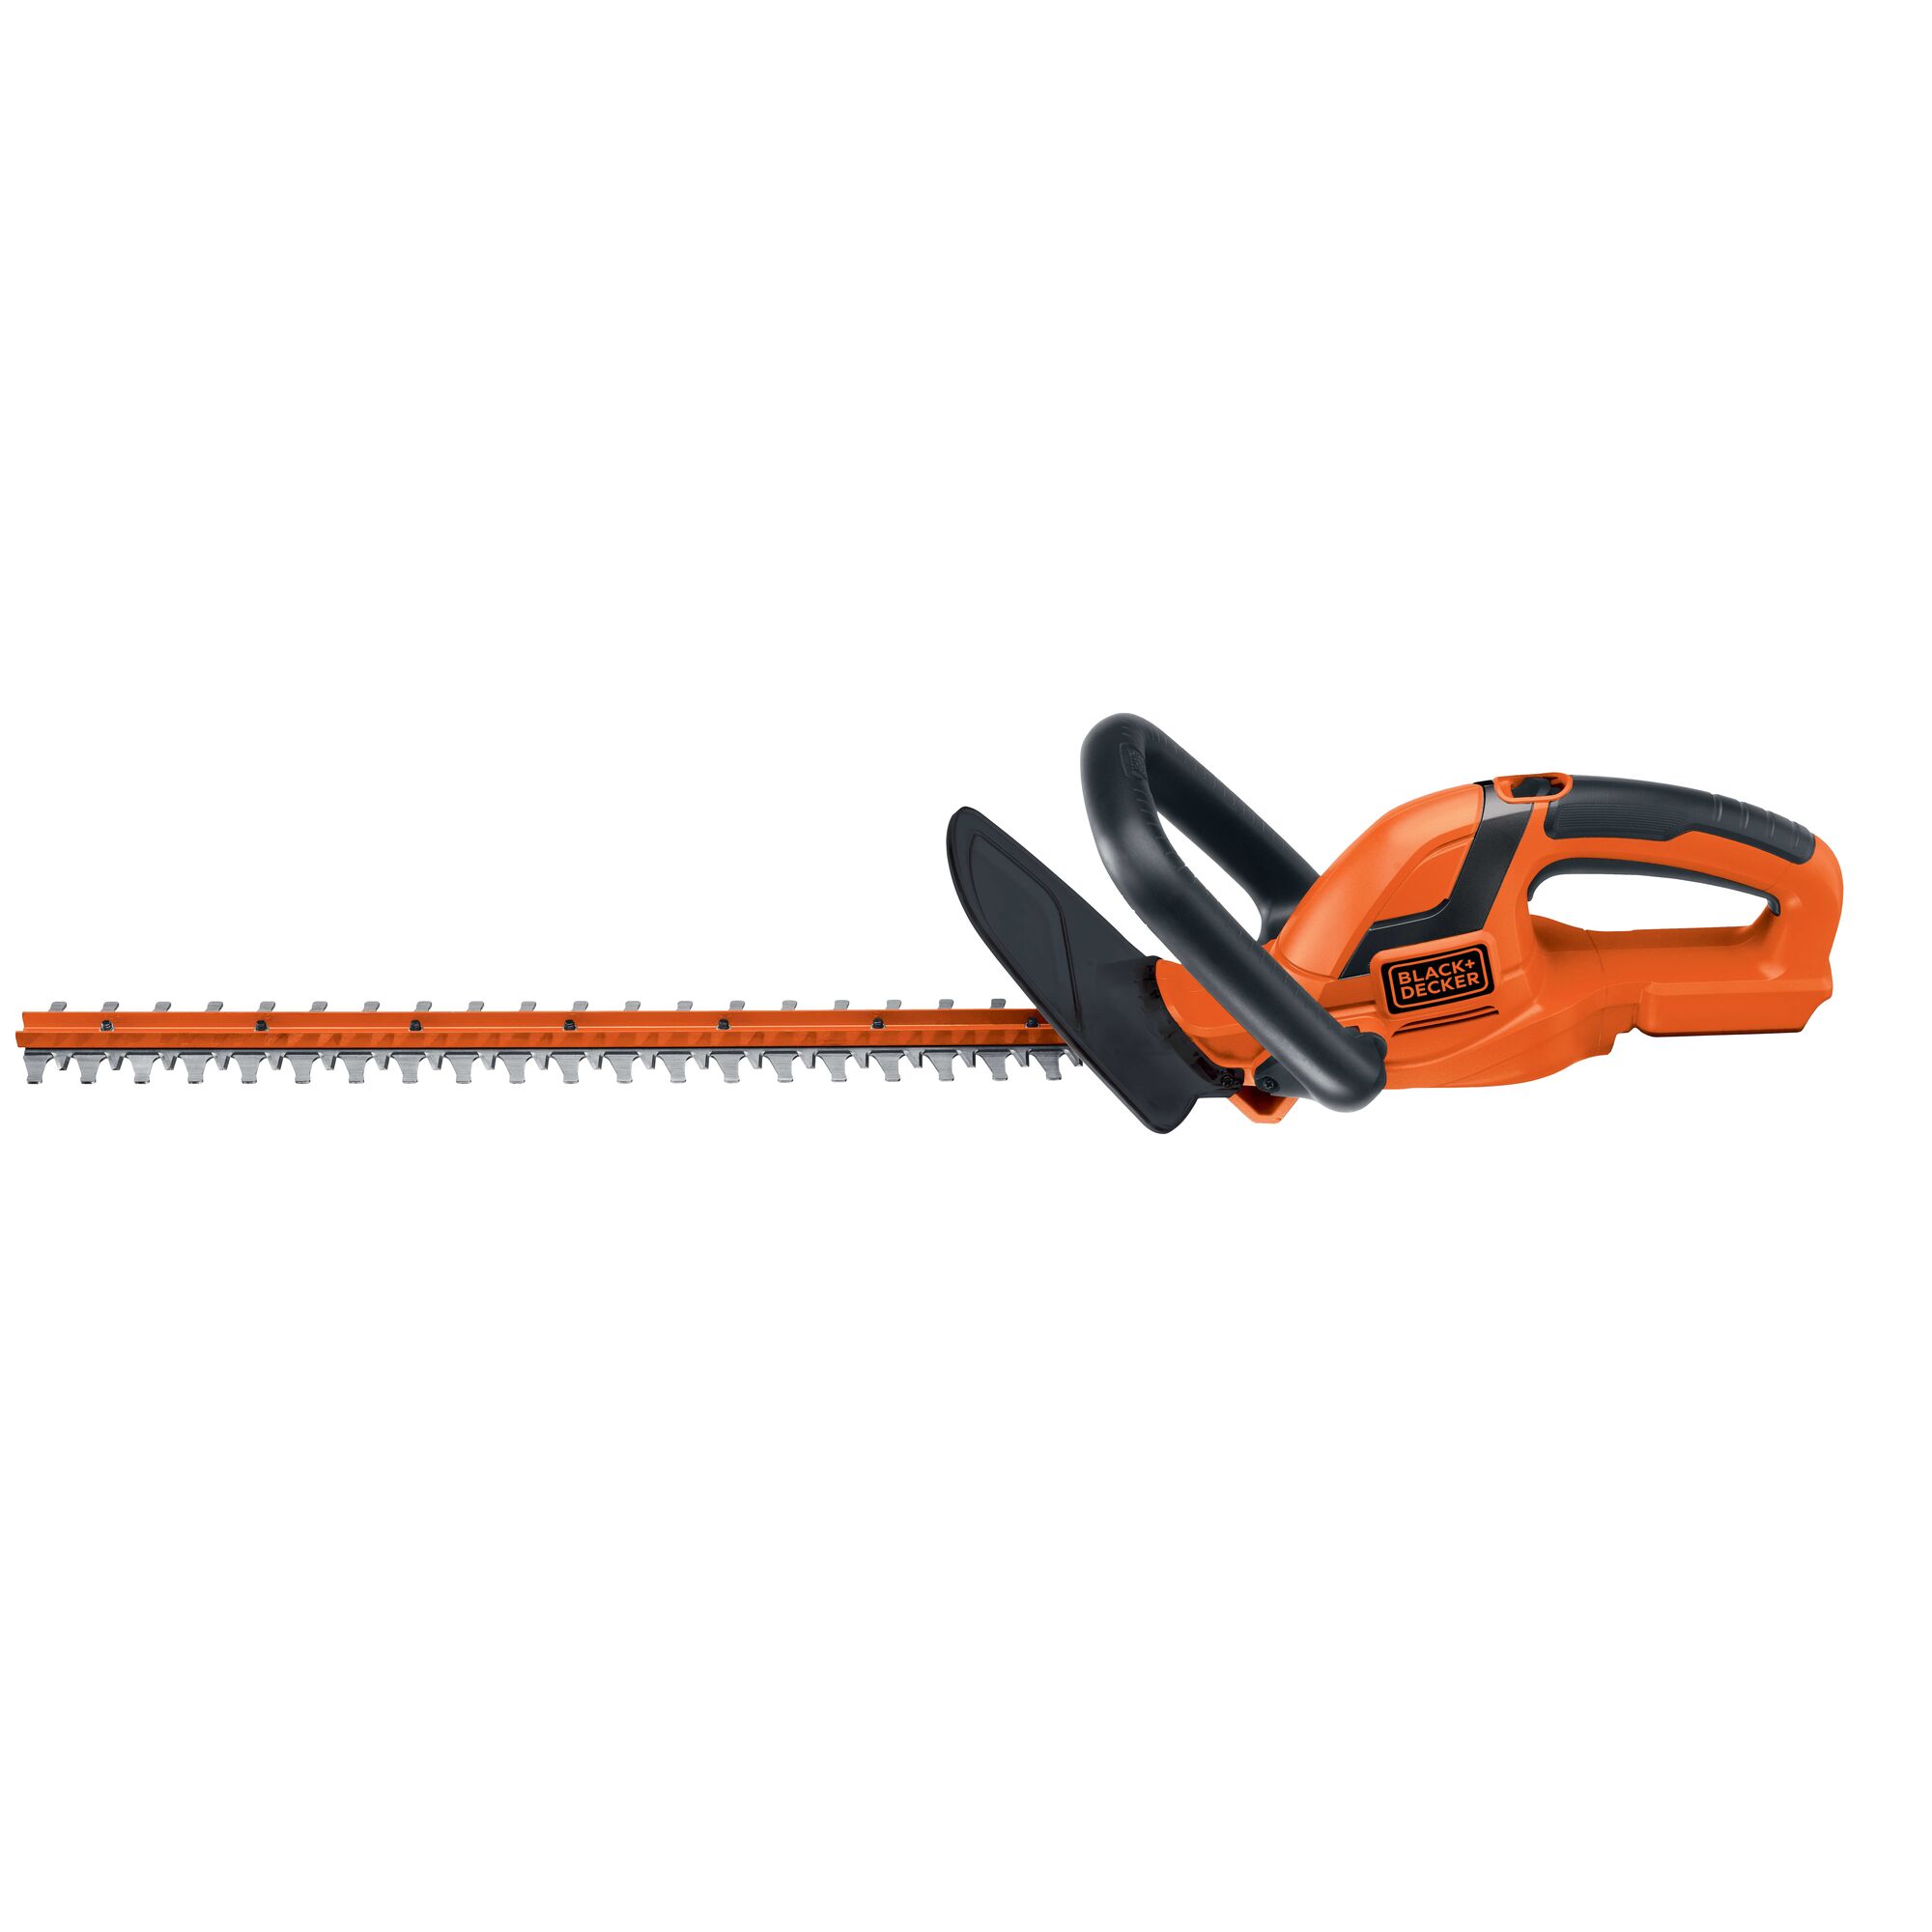 20 Volt Lithium 22 inch Hedge Trimmer Battery and Charger Not Included.